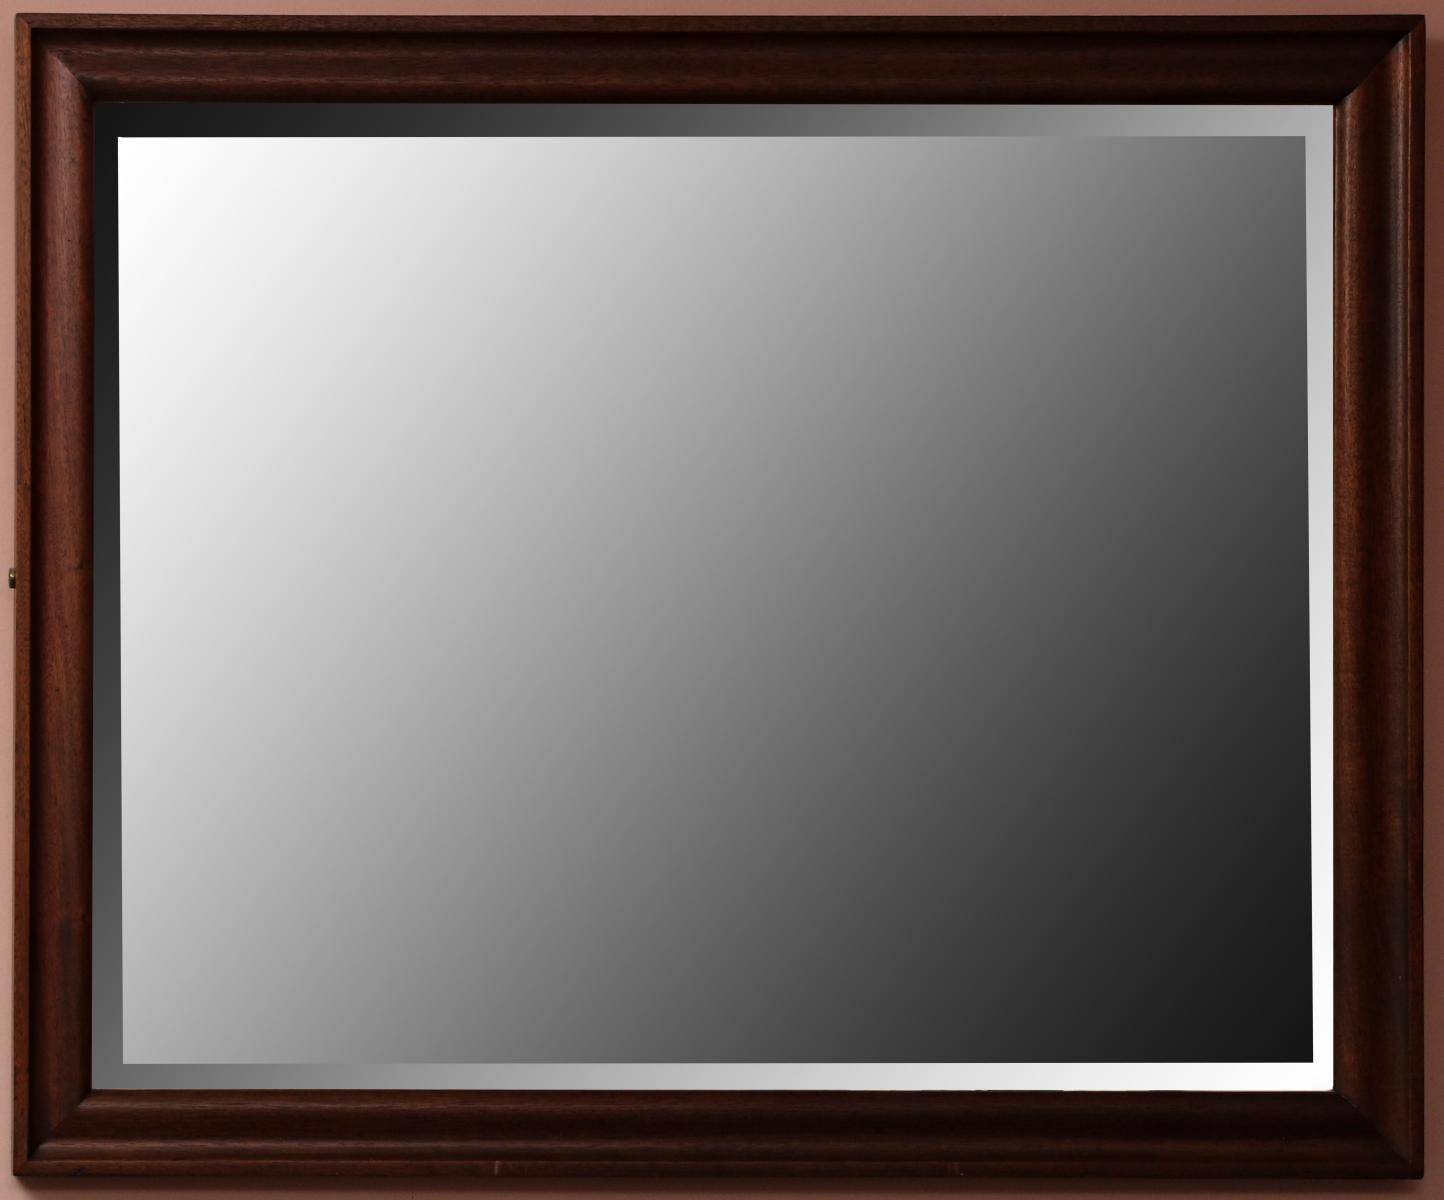 A LARGE BEVELED PLATE MIRROR IN WOOD FRAME